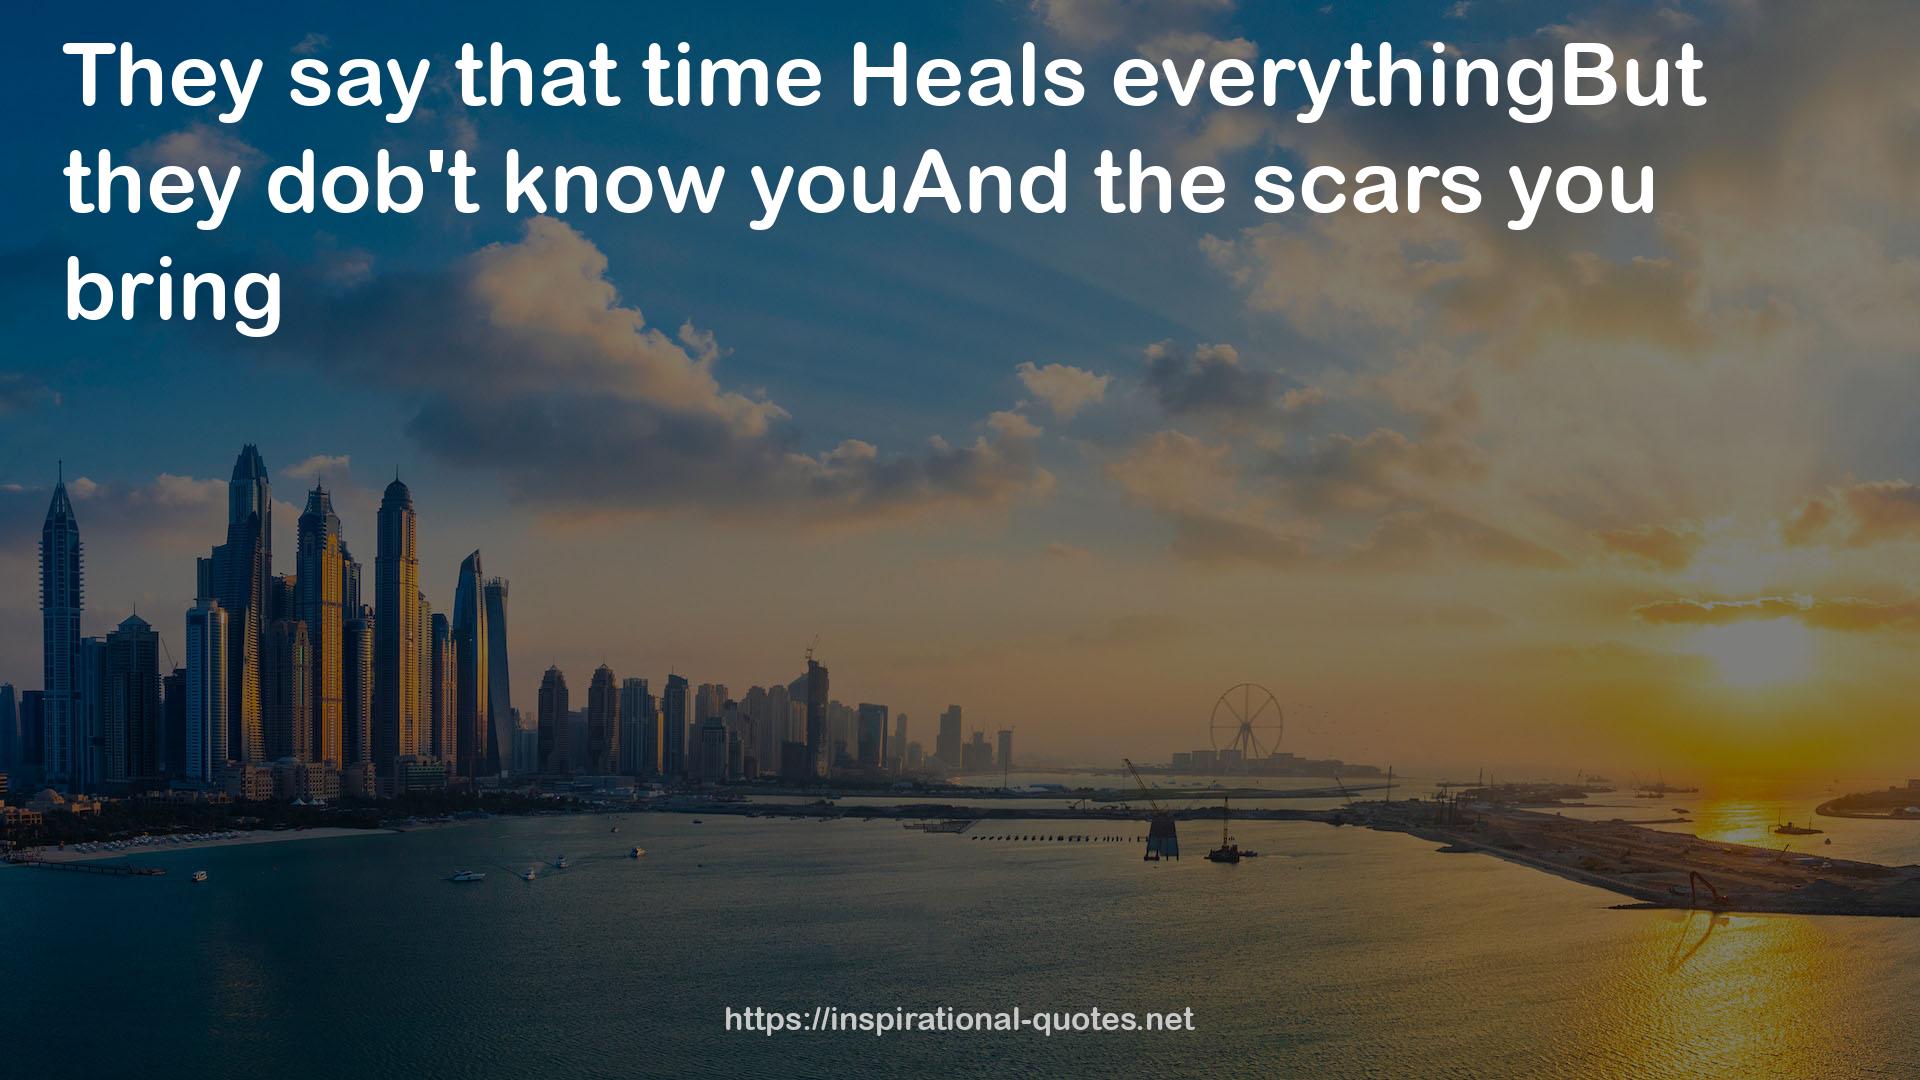 Heals everythingBut  QUOTES